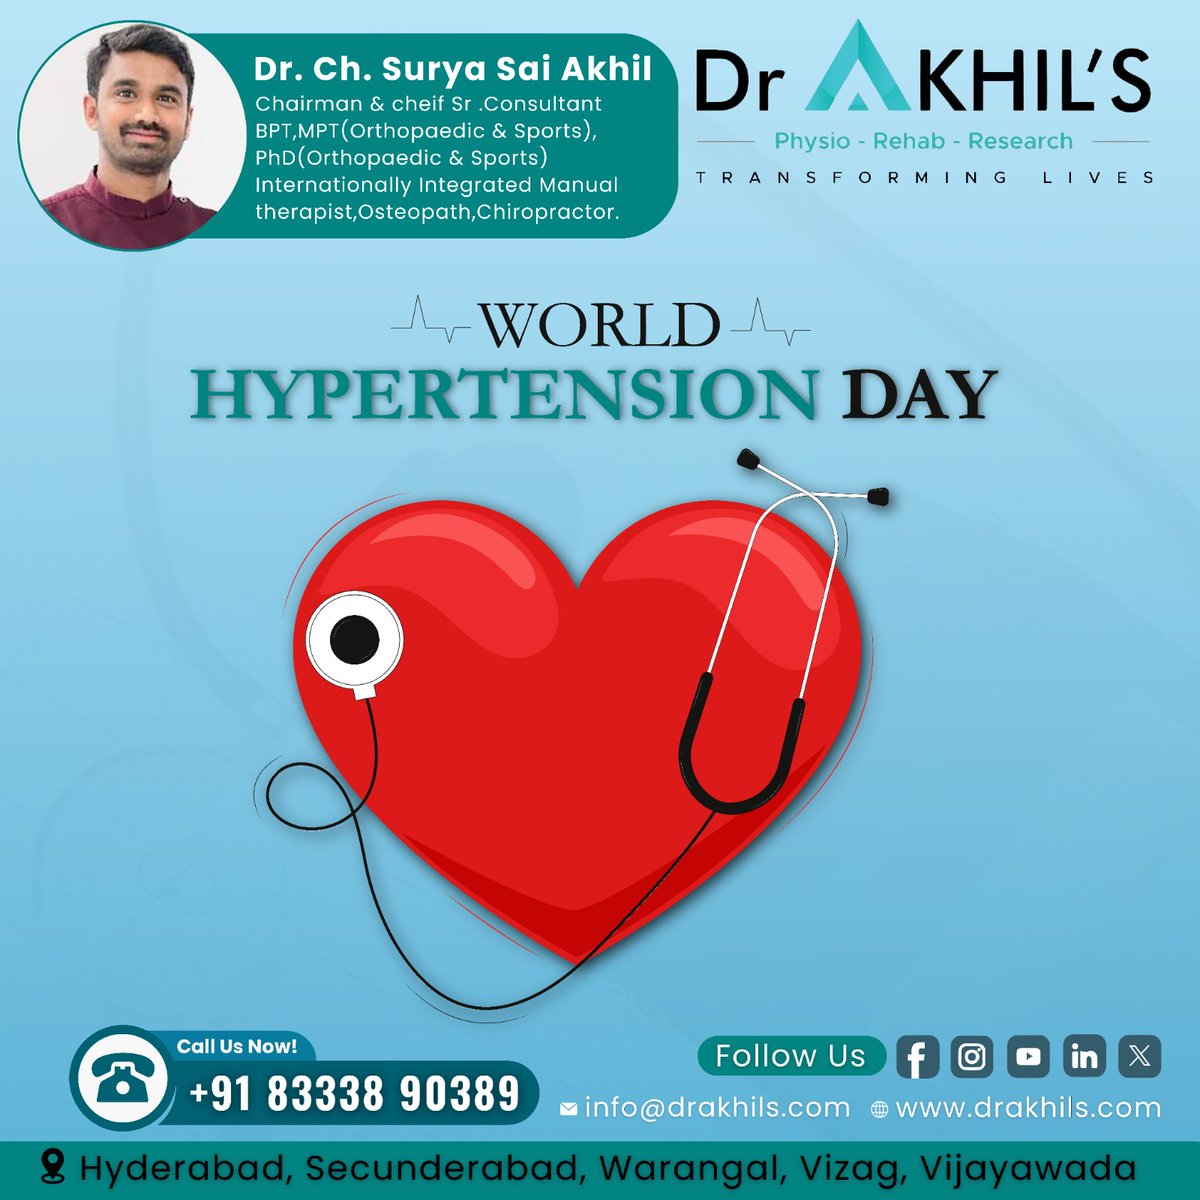 Healthy heart, happy life: Fight hypertension.
☎️ Call/WhatsApp: 83338 90389
🌐 drakhils.com

#WorldHypertensionDay
#HypertensionAwareness
#KnowYourNumbers
#BloodPressure
#Physiotherapy #PhysicalTherapy #Rehabilitation #MovementMatters #PainRelief #Mobility